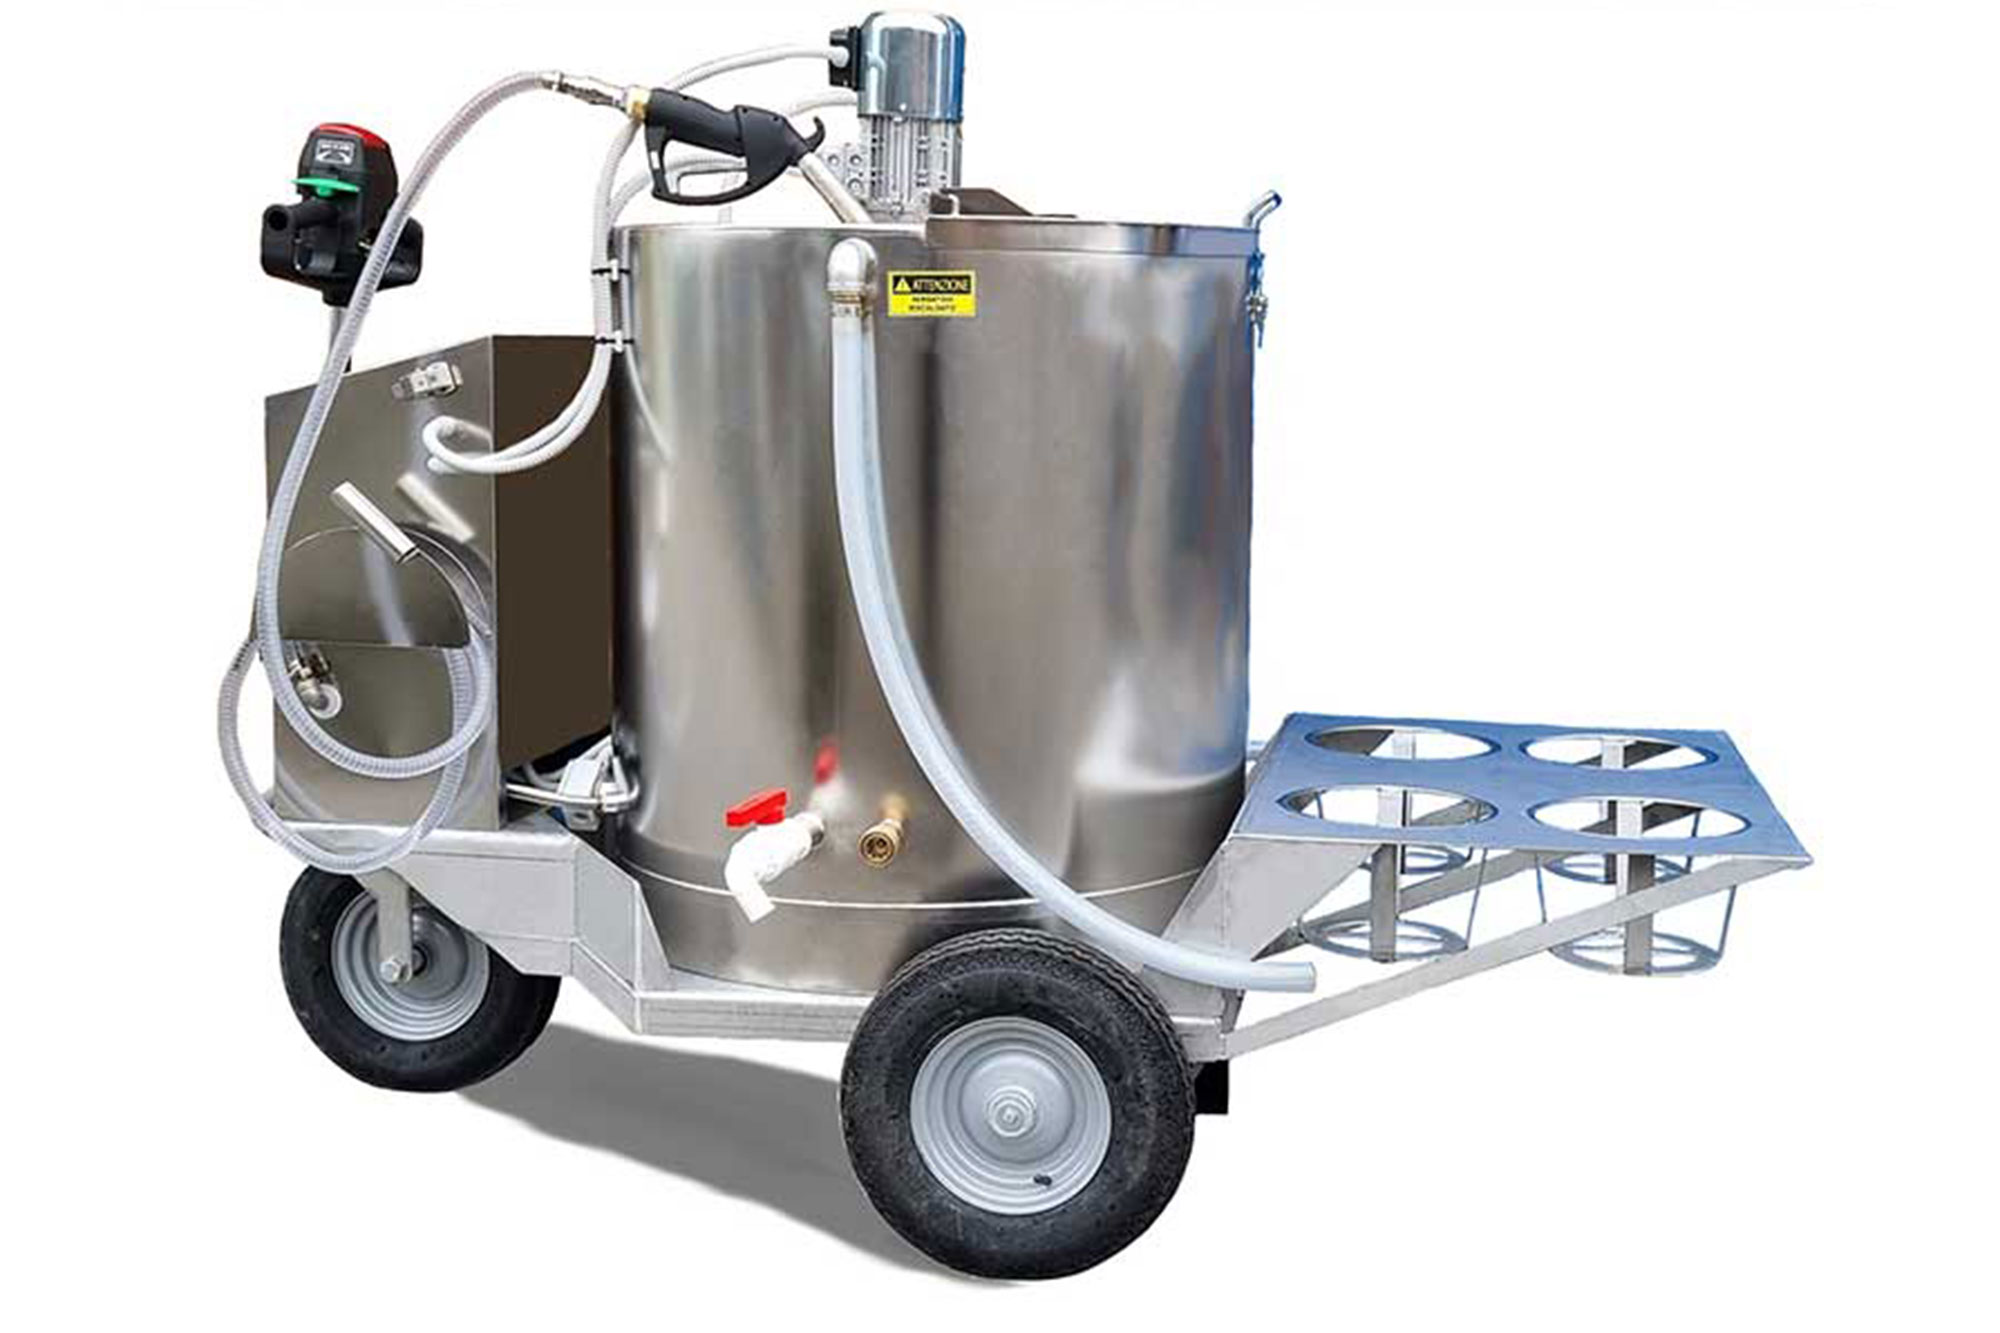 Calf pasteurizer entirely made of stainless steel